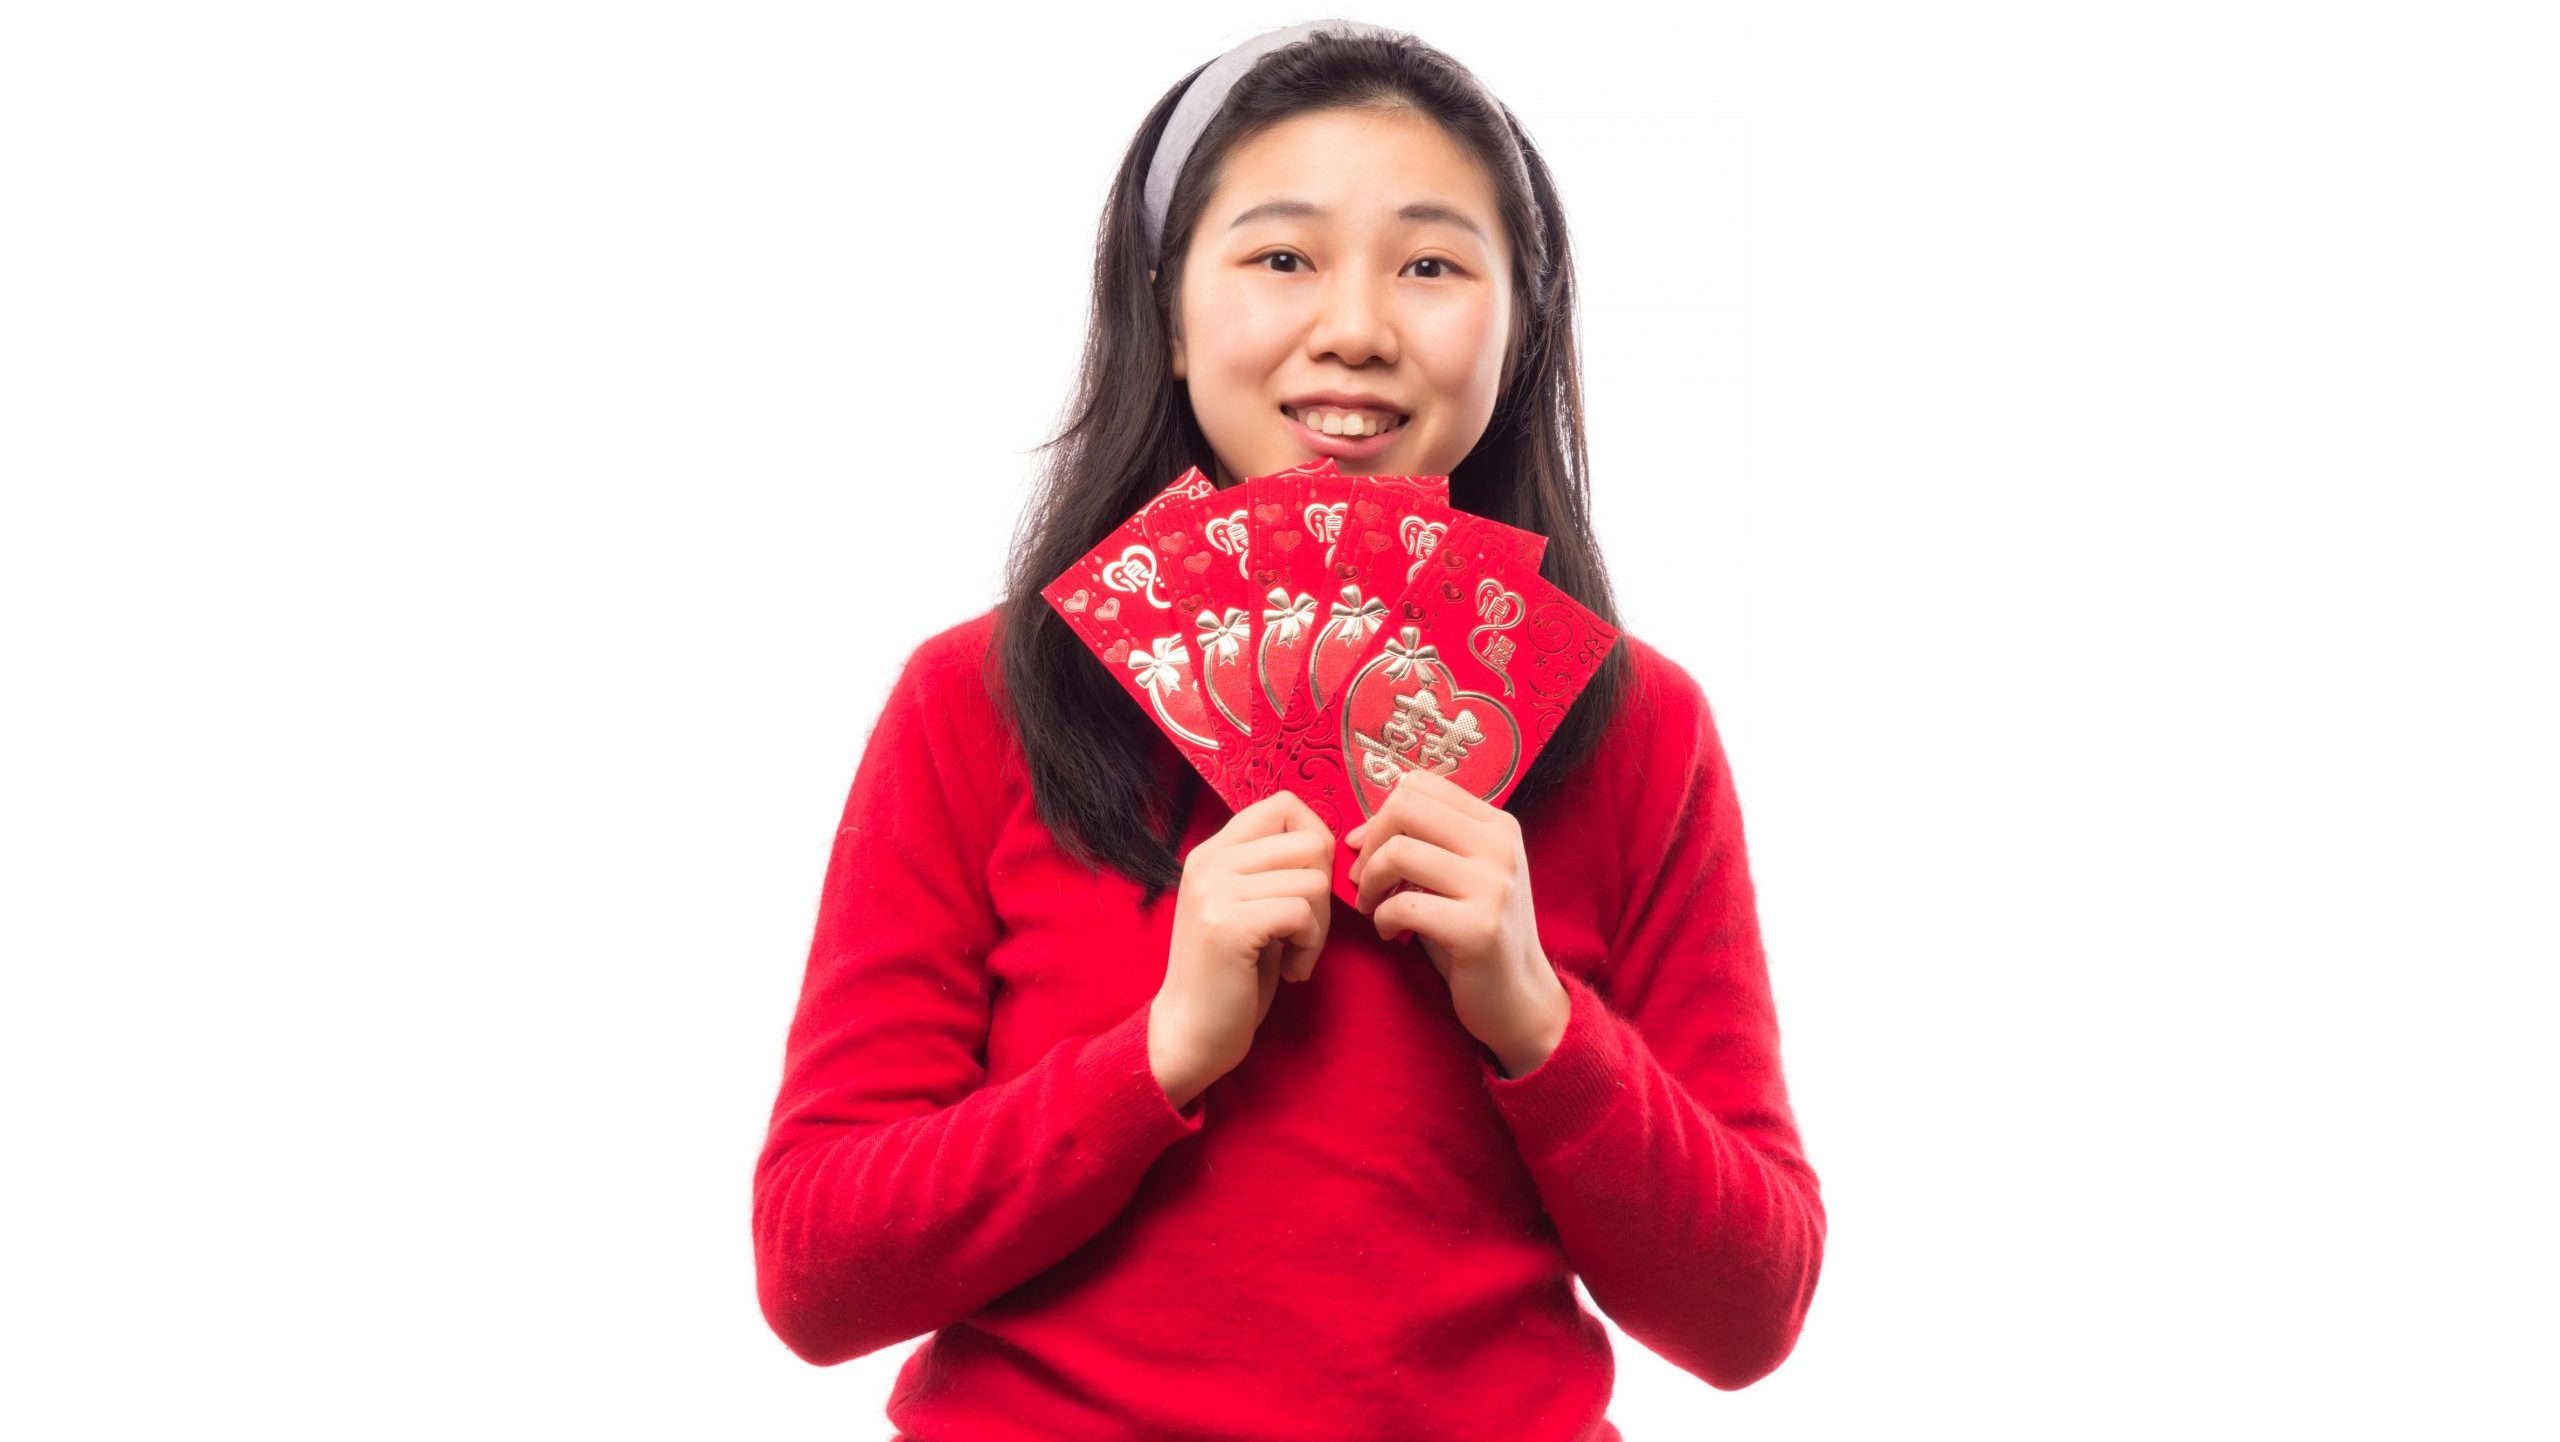 Young Asian woman in red sweater holding ang bao envelopes.